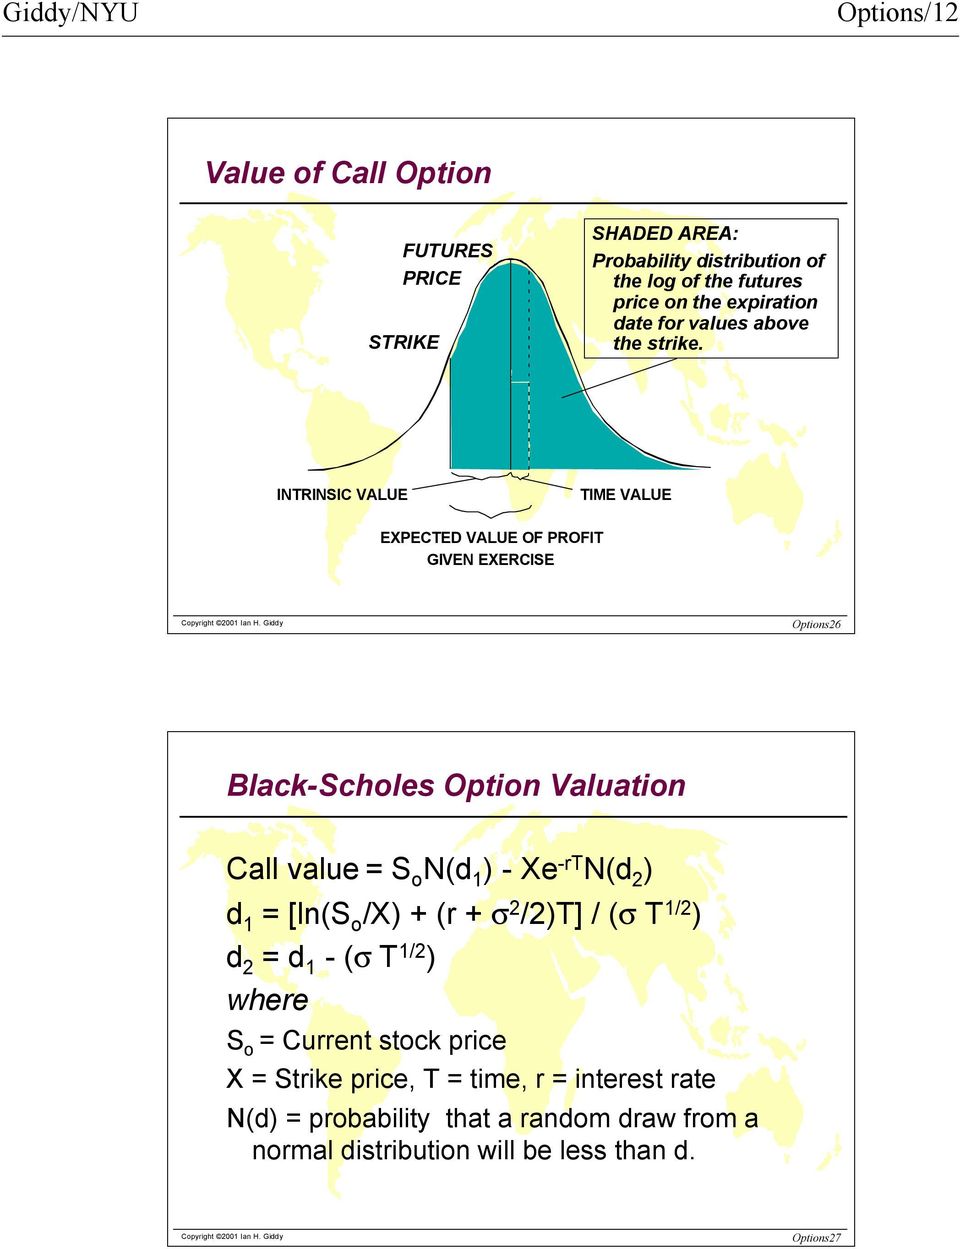 INTRINSIC VALUE TIME VALUE EXPECTED VALUE OF PROFIT GIVEN EXERCISE Options26 Black-Scholes Option Valuation Call value = S o N(d 1 ) - Xe -rt